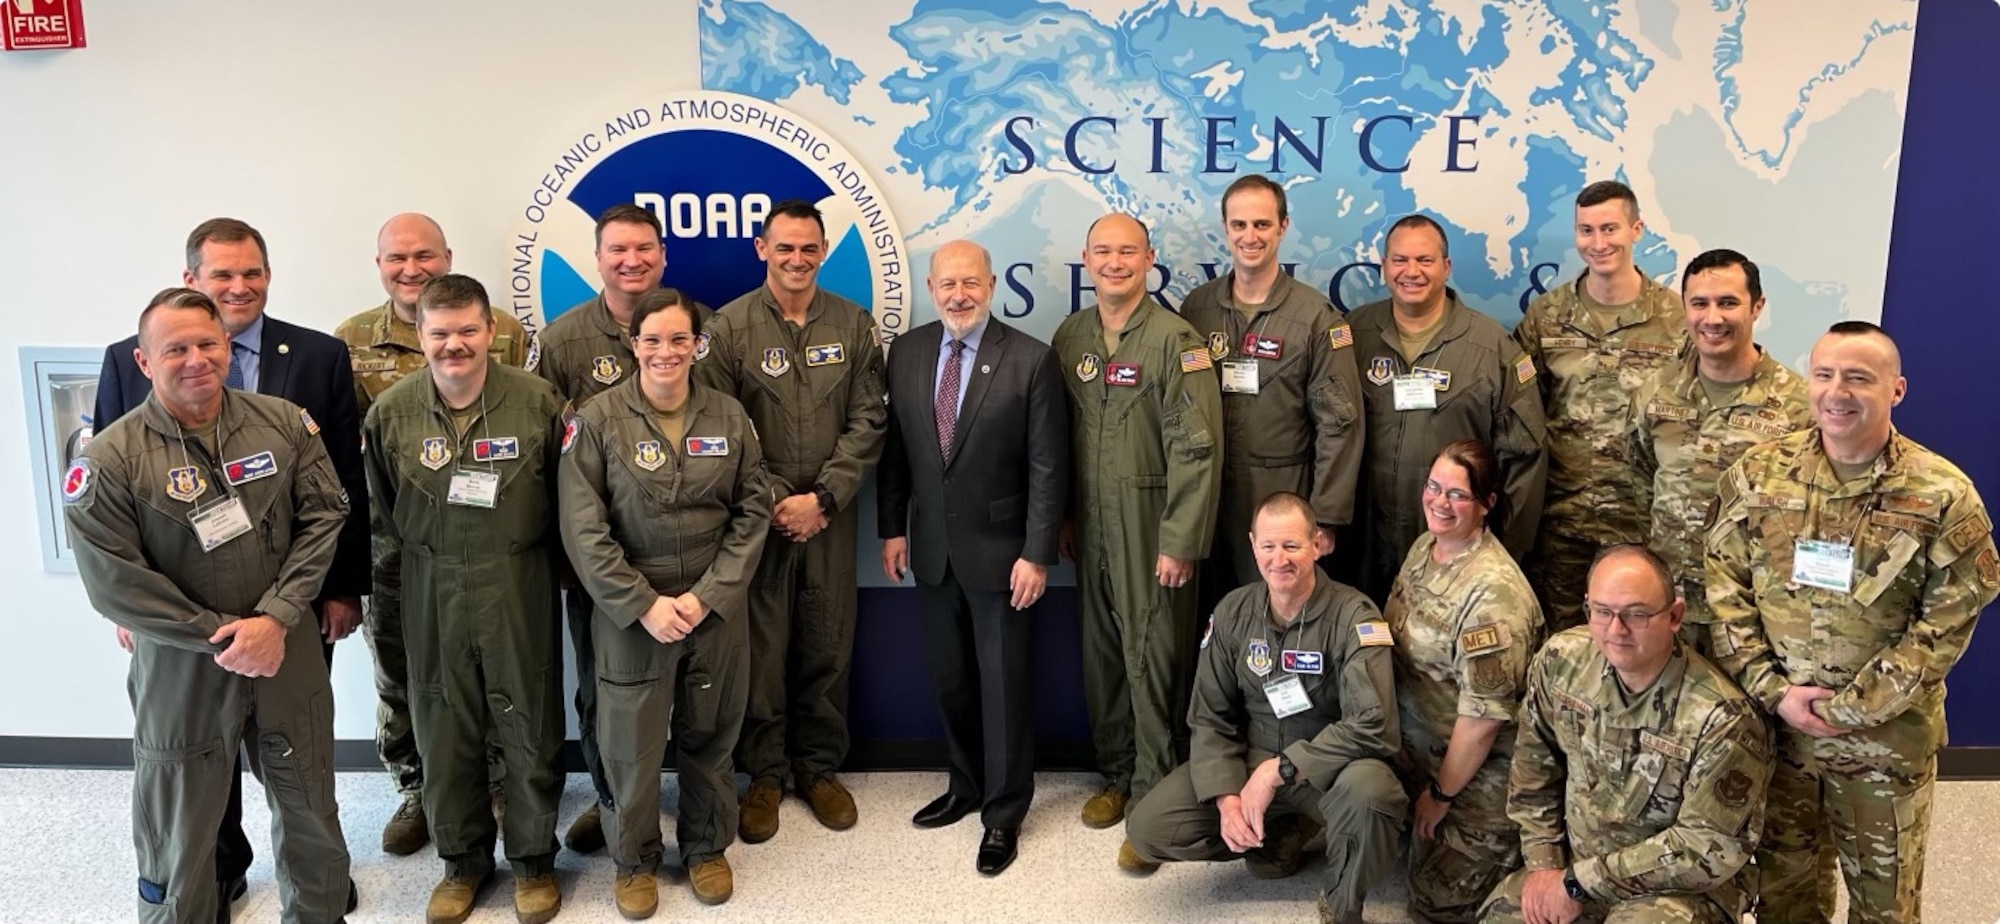 Air Force Reserve members and NOAA members pose in a group photo during a conference.